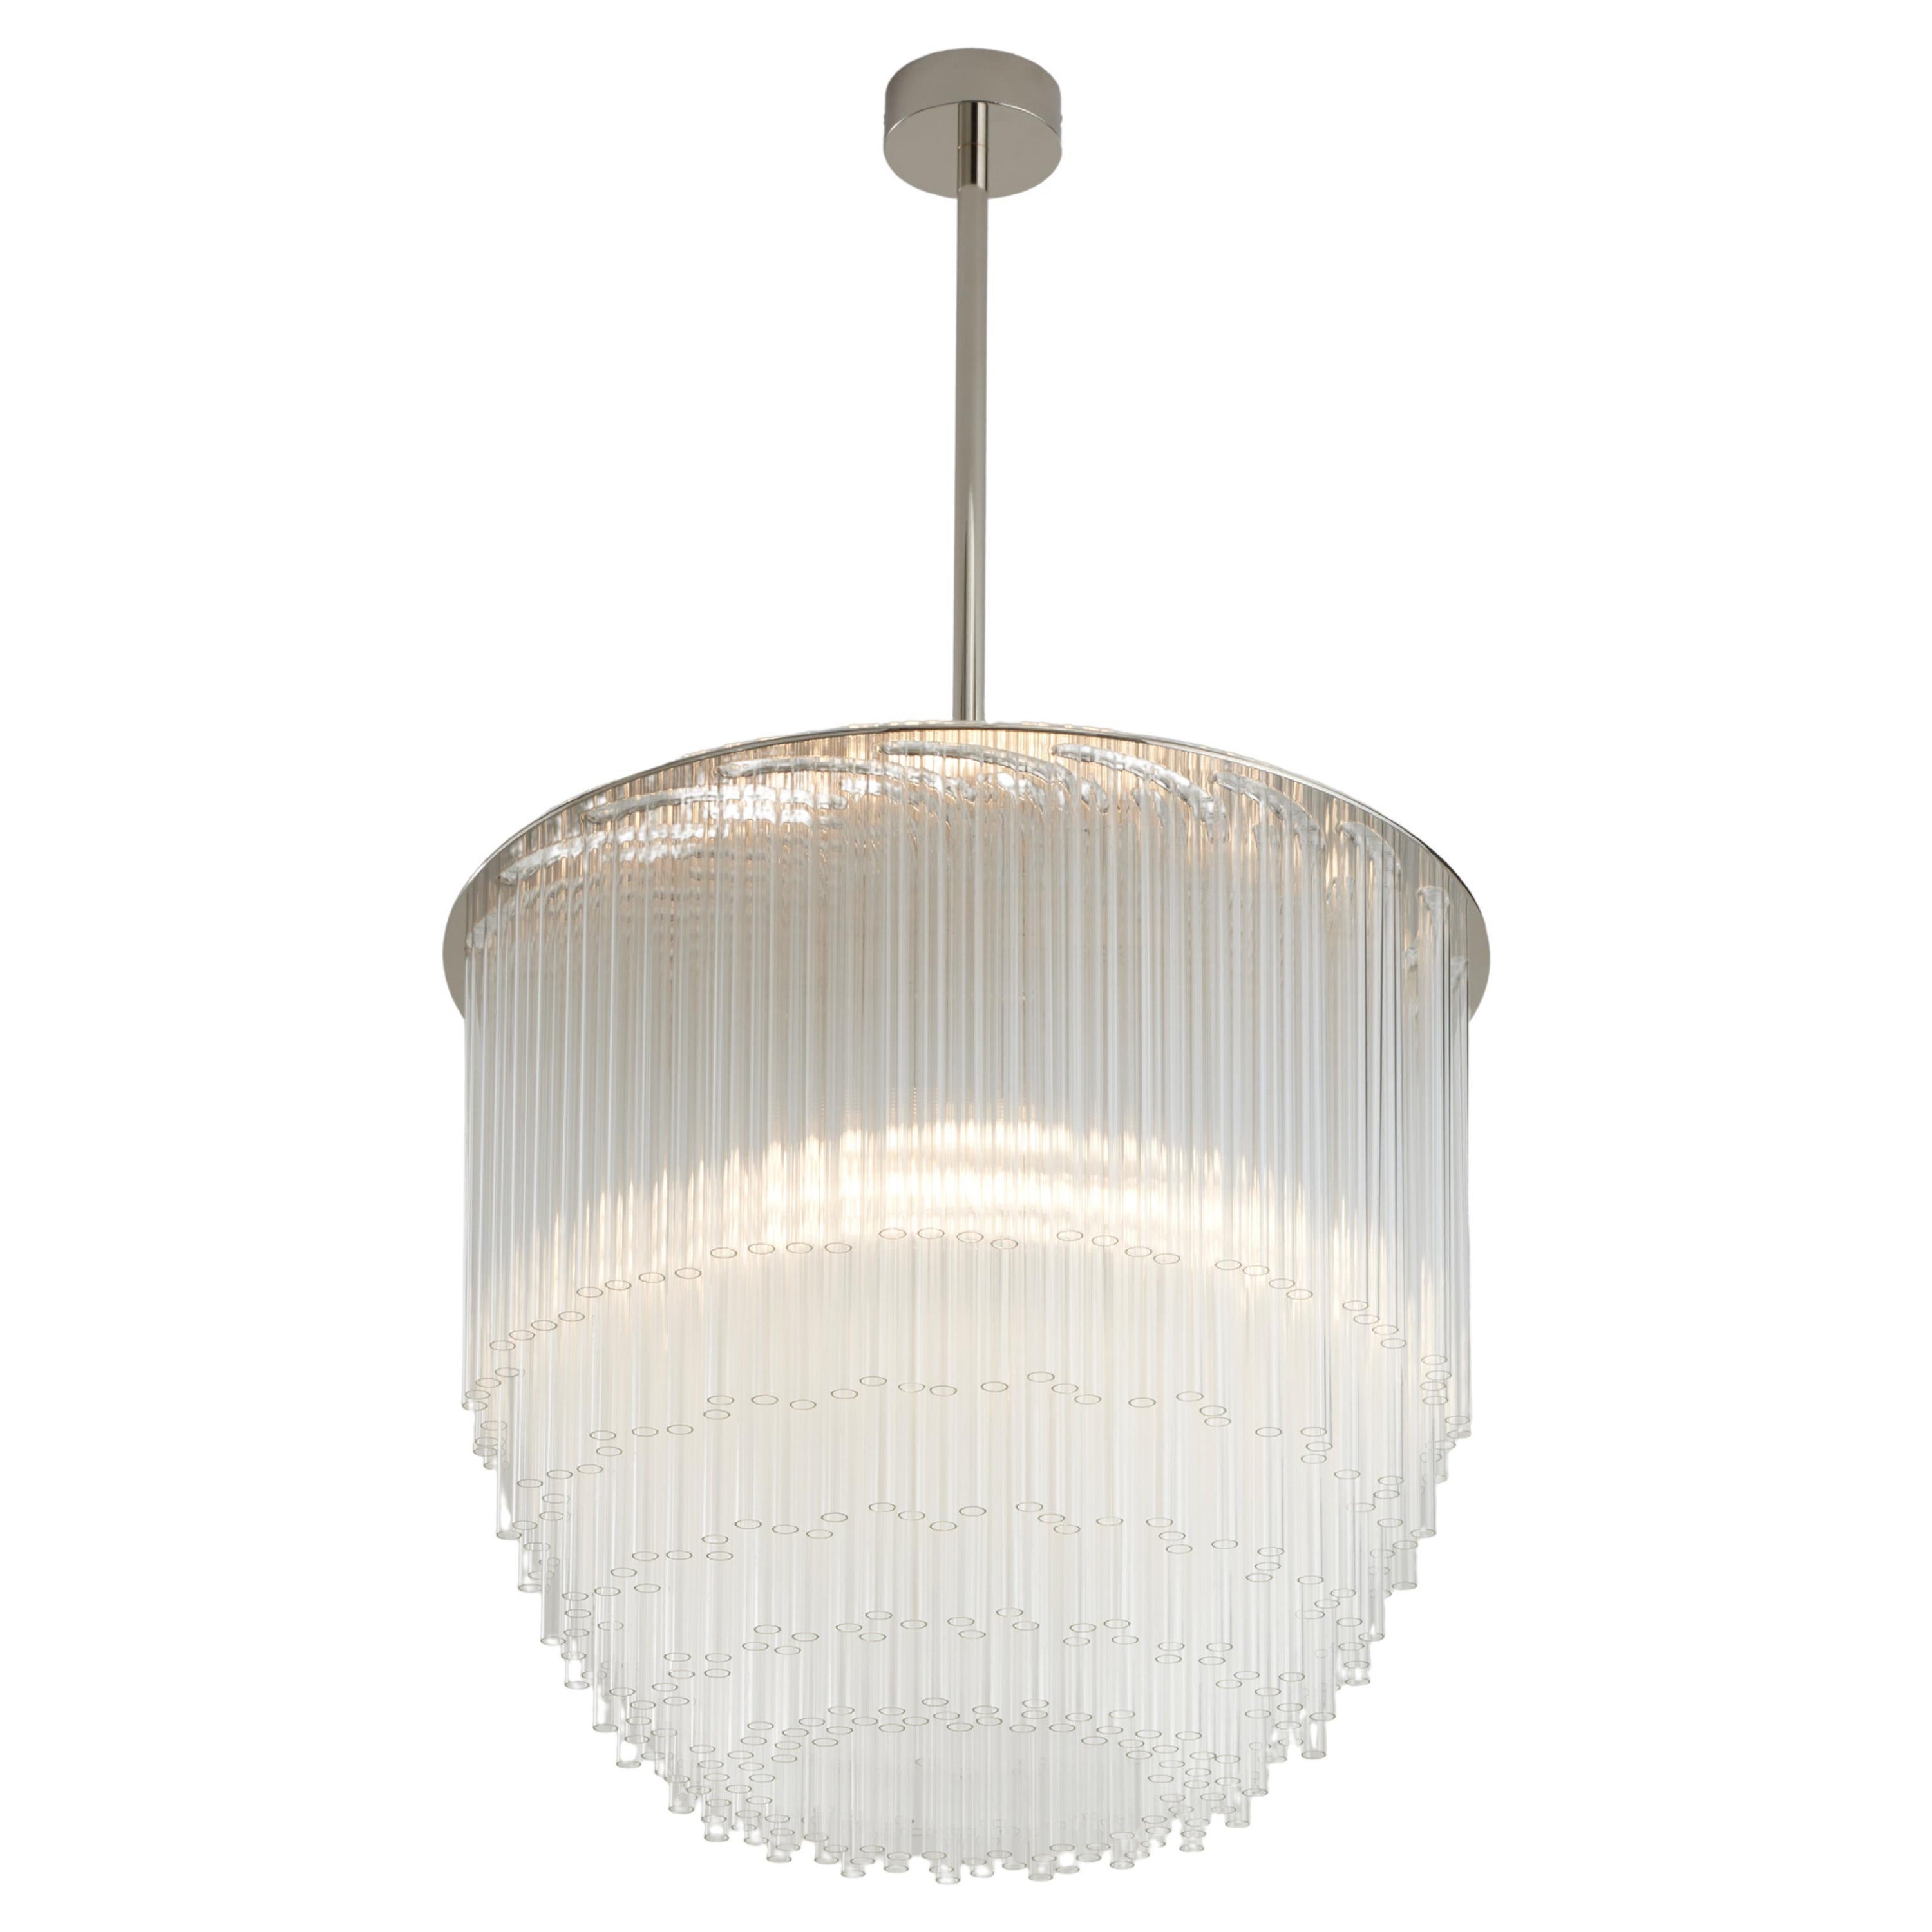 Disc Chandelier 500mm / 19.75" in Polished Chrome, UL Listed For Sale